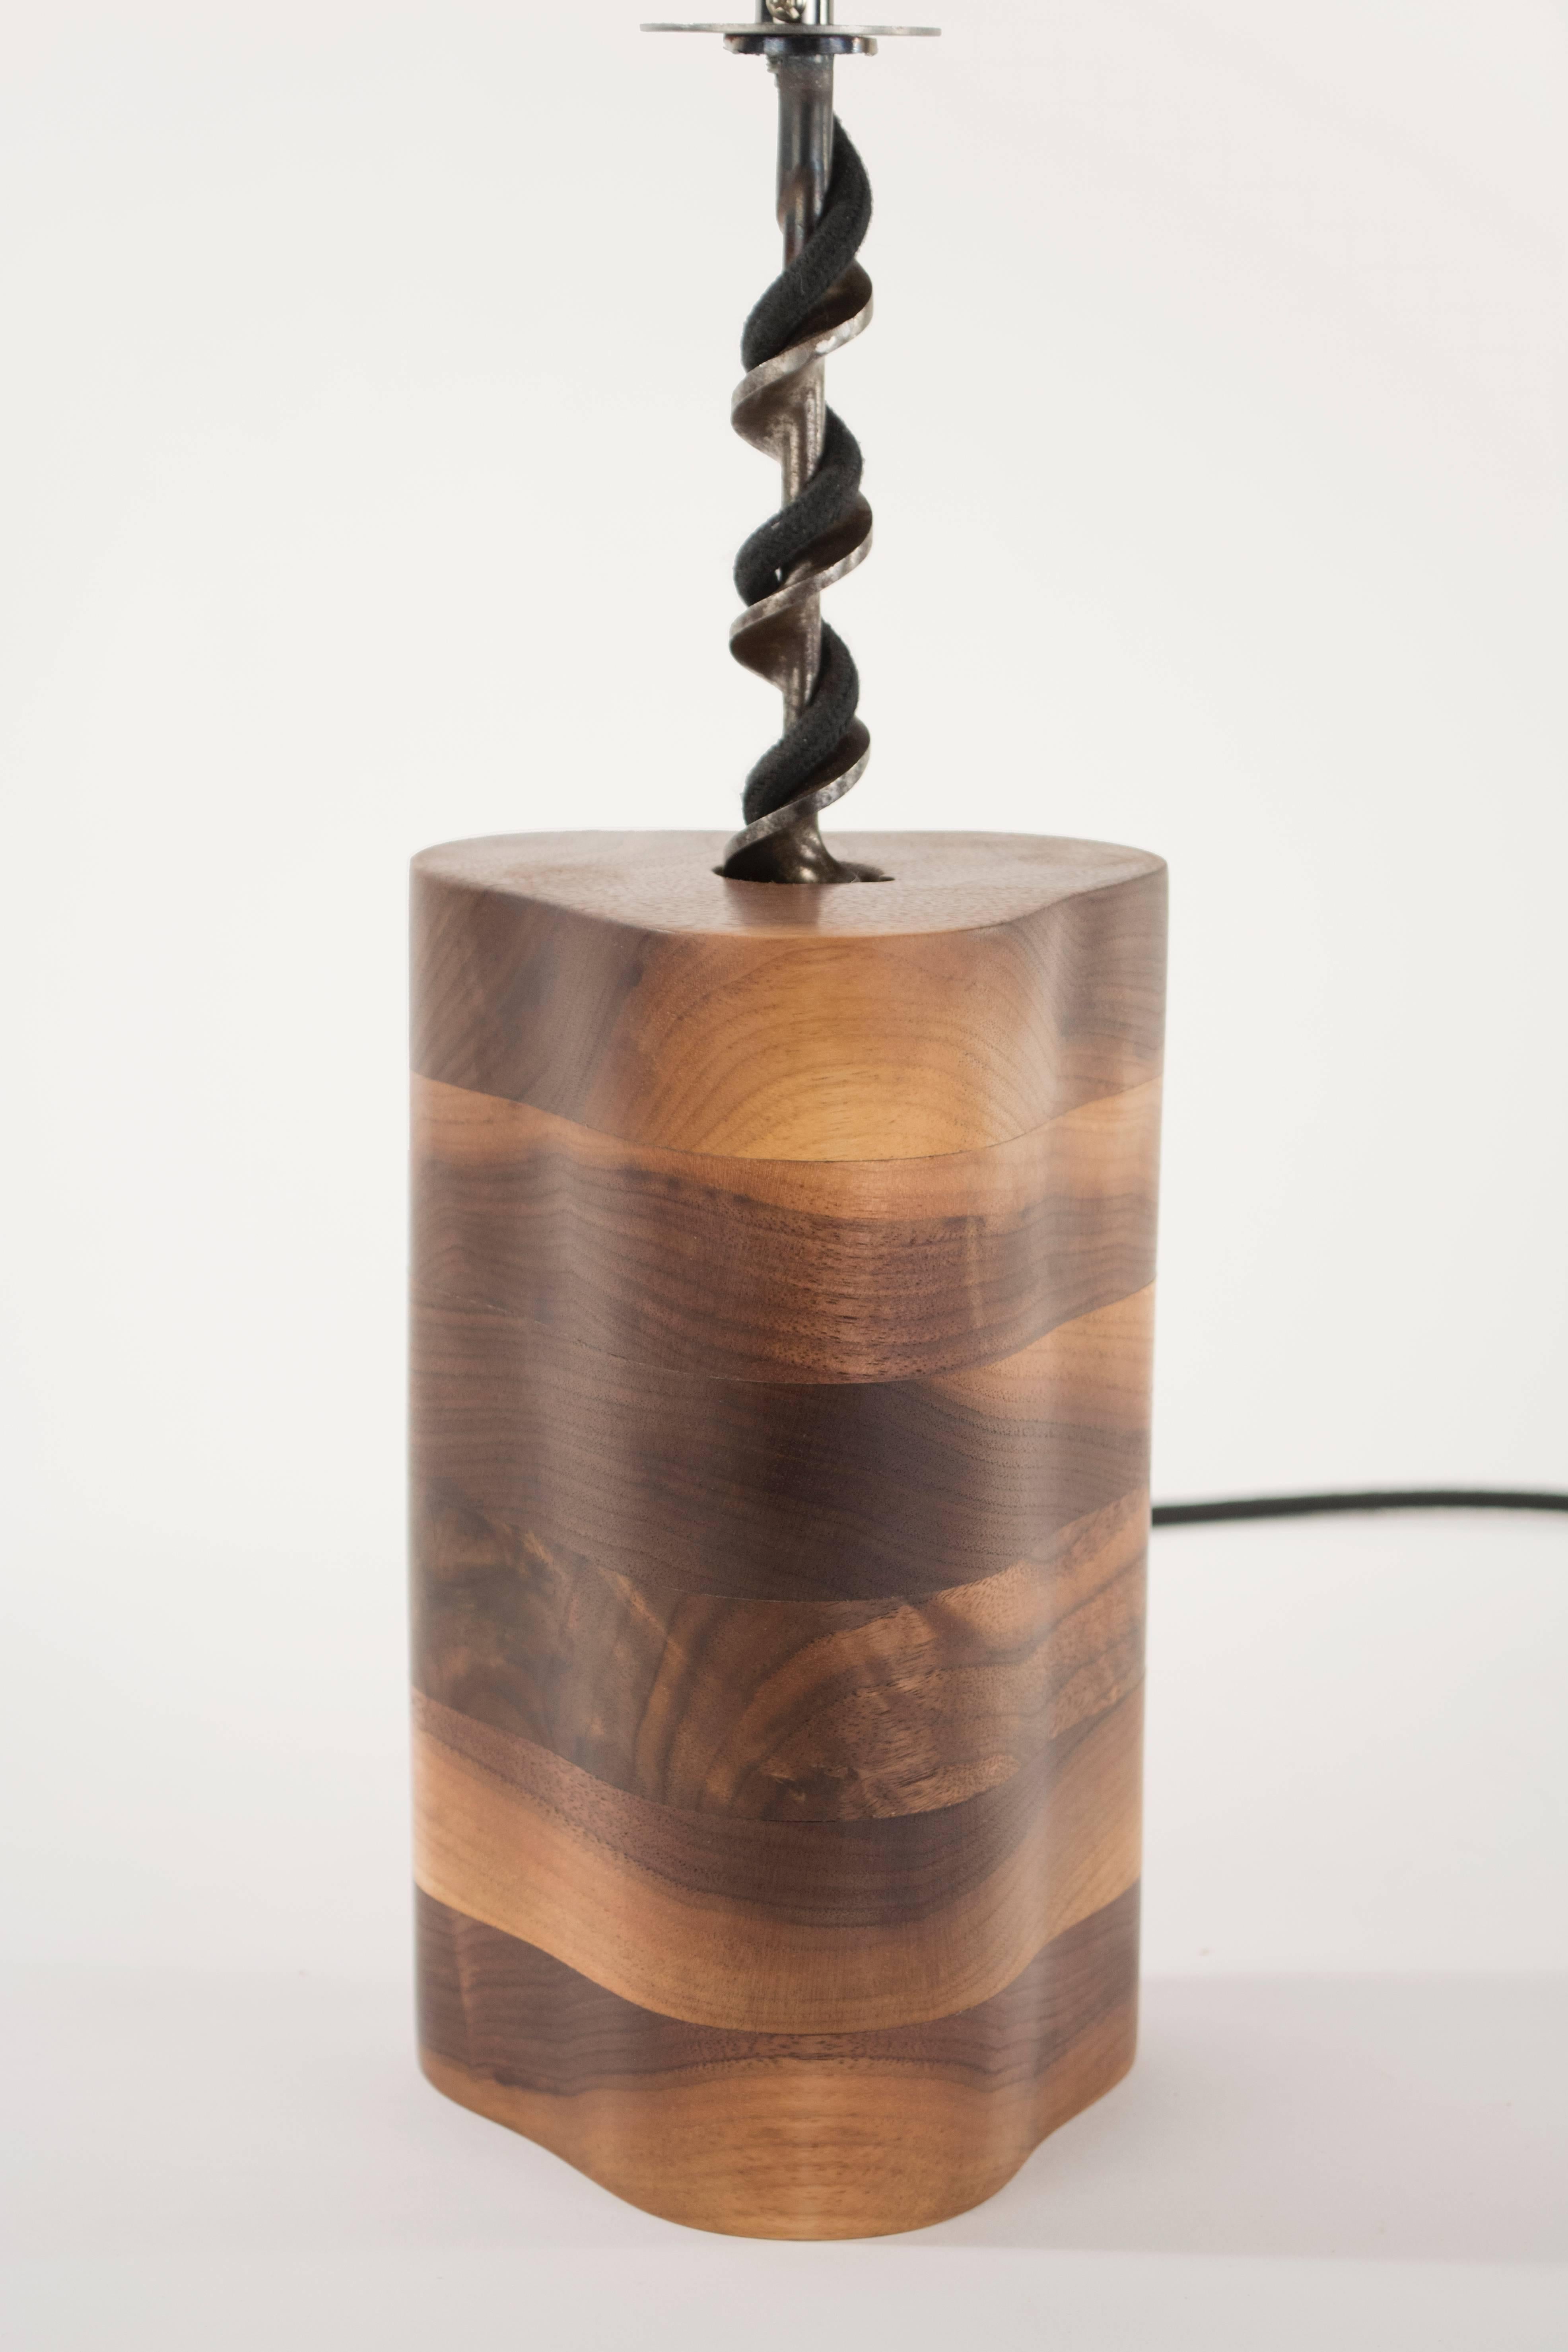 - stack laminated black walnut - antique drill bit - cloth wrapped lamp cord - fully dimmable oil rubbed bronze fixture - tungsten bulb. 

Measure: 5 x 5 x 21 inches (L x W x H.)

Wired for 120 v outlets unless 220 v is requested, everything is